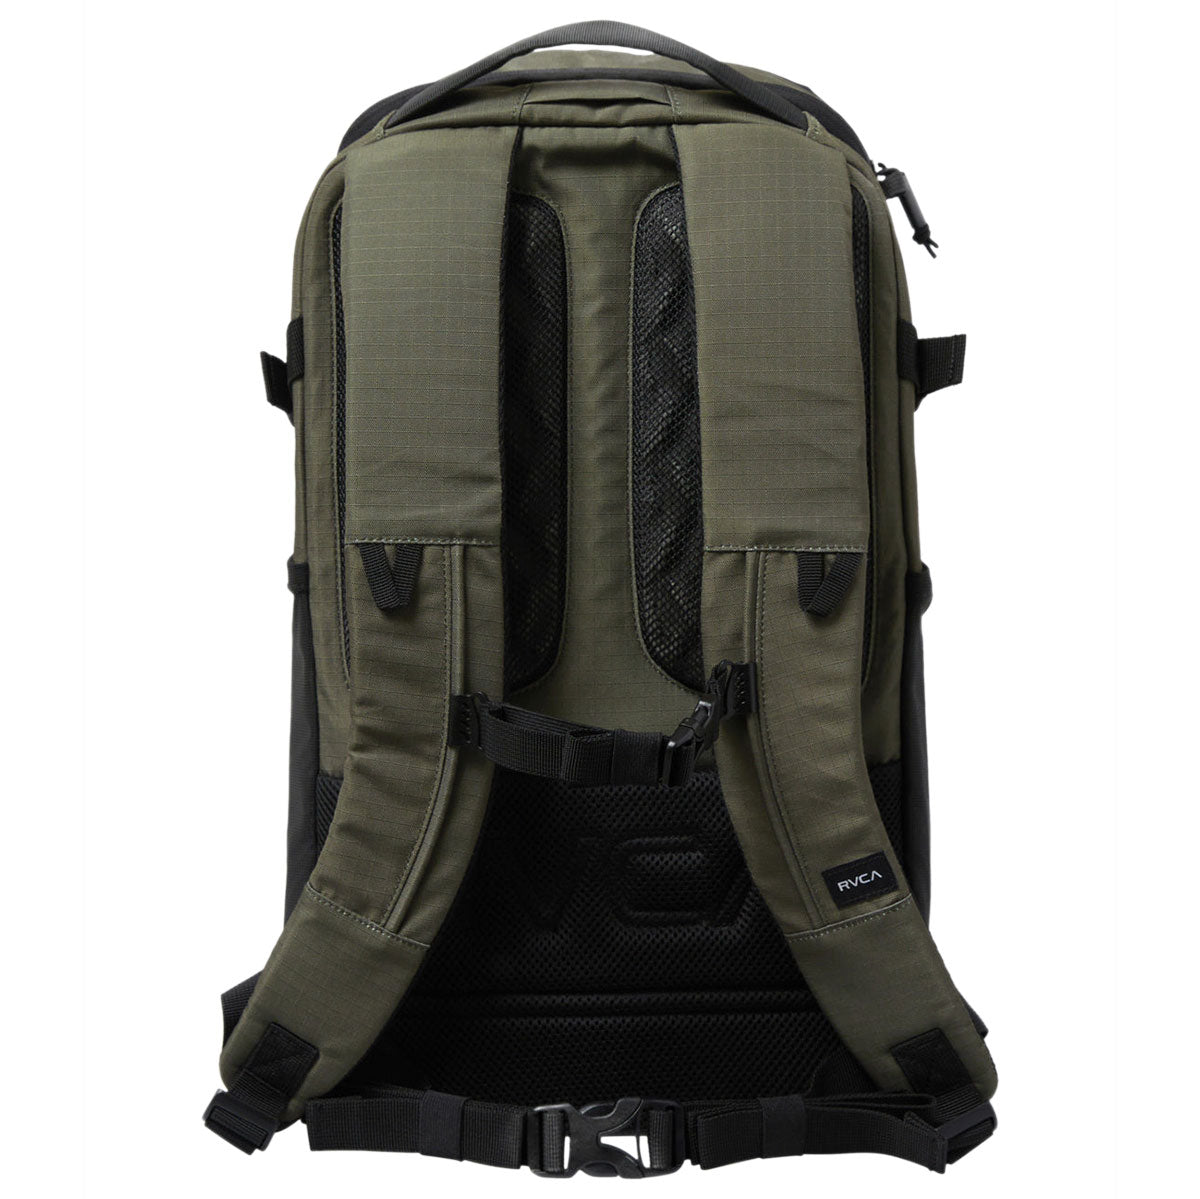 RVCA Rvca Daypack Backpack - Olive image 2